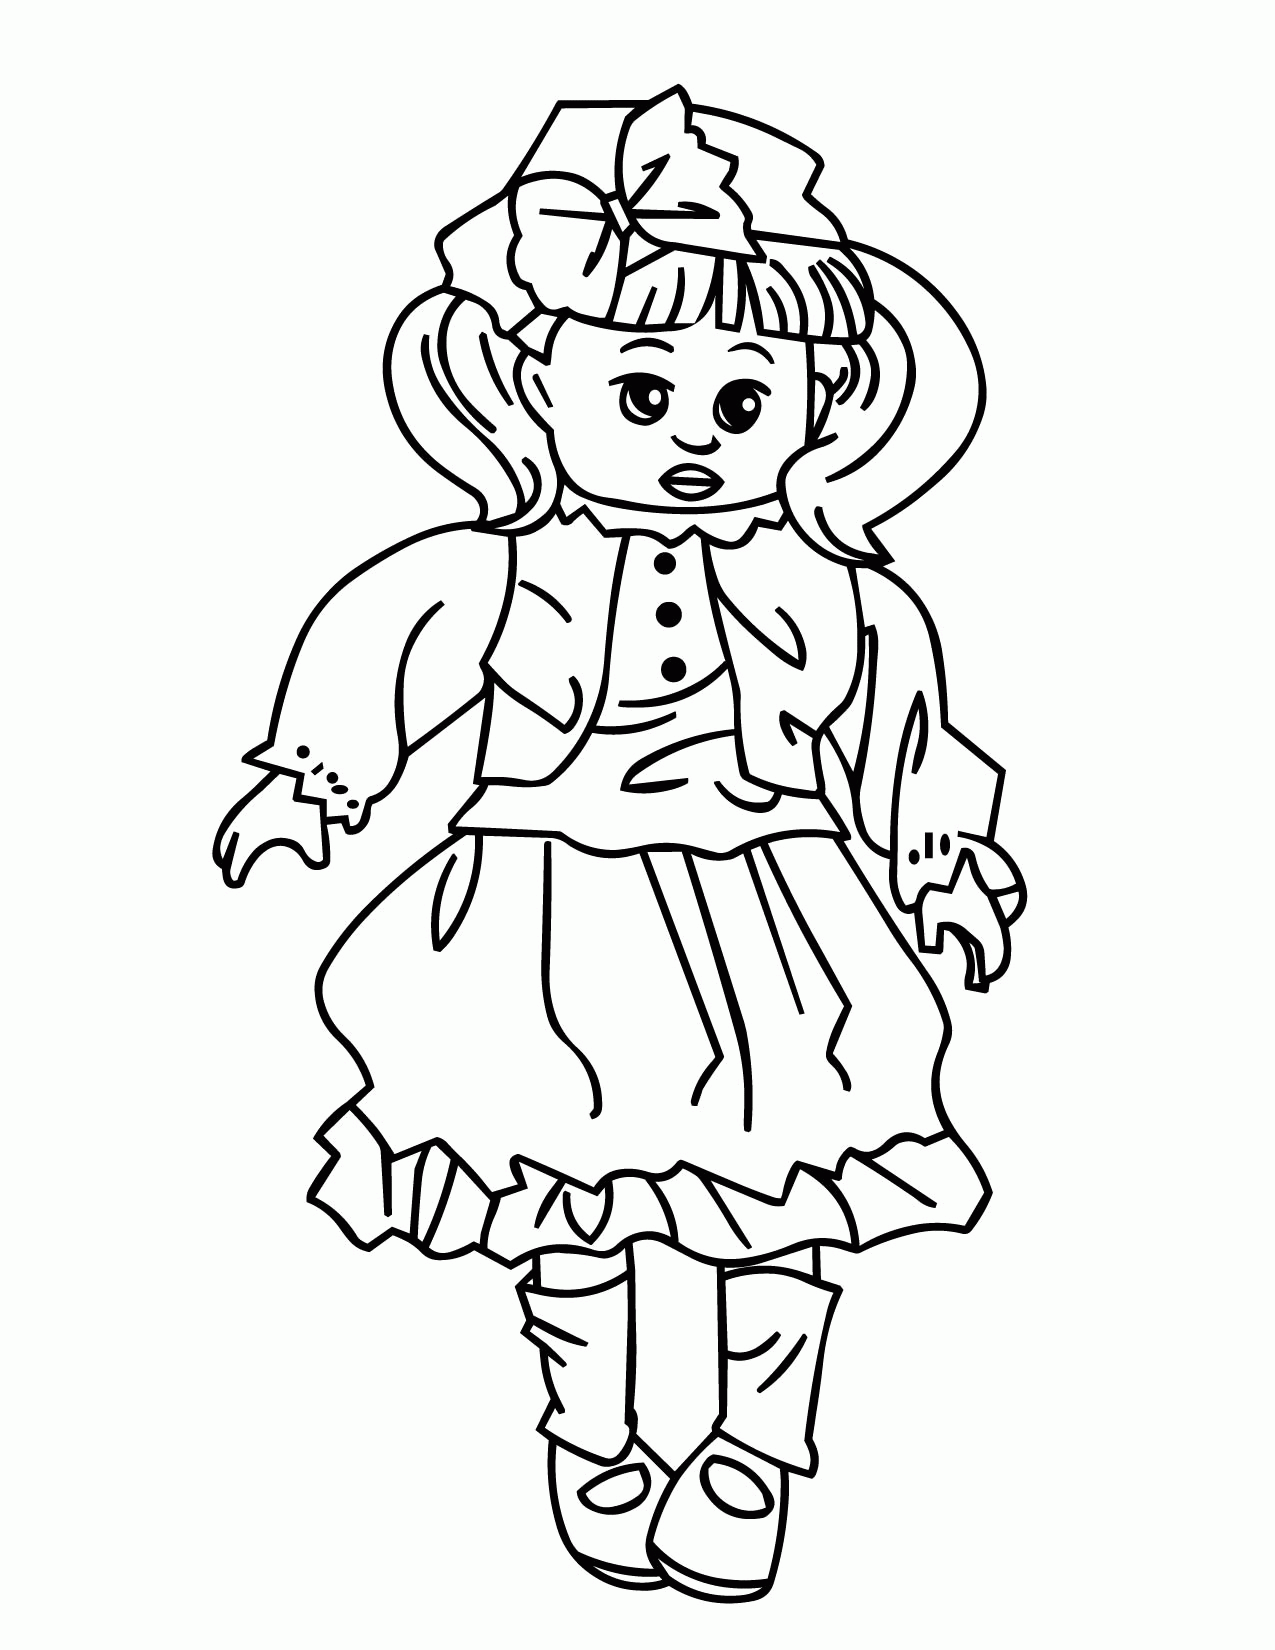 Free Coloring Pages Dolls Download Free Coloring Pages Dolls Png 